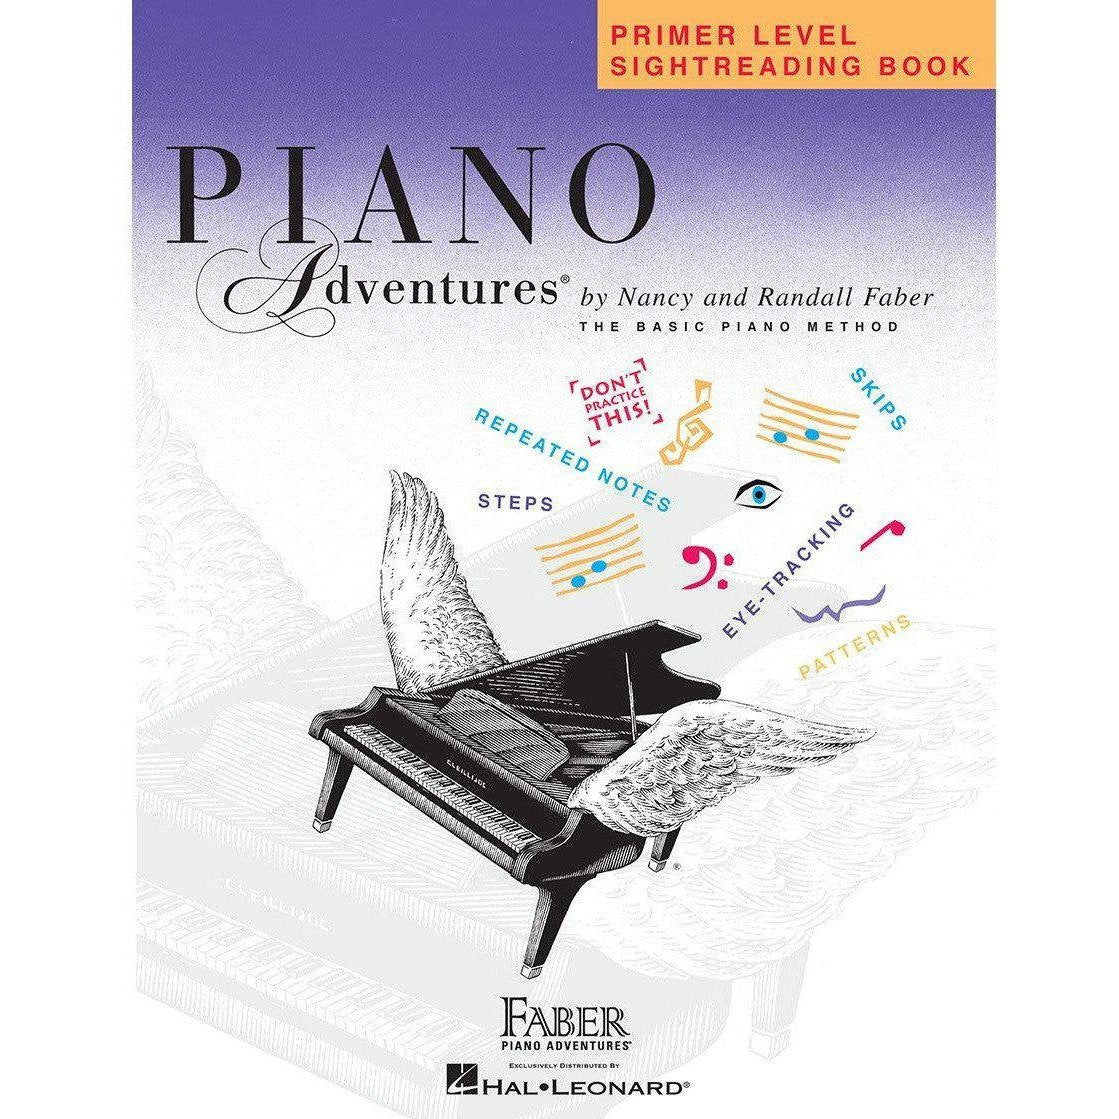 Faber Piano Adventures-Primer-Sightreading-Andy's Music